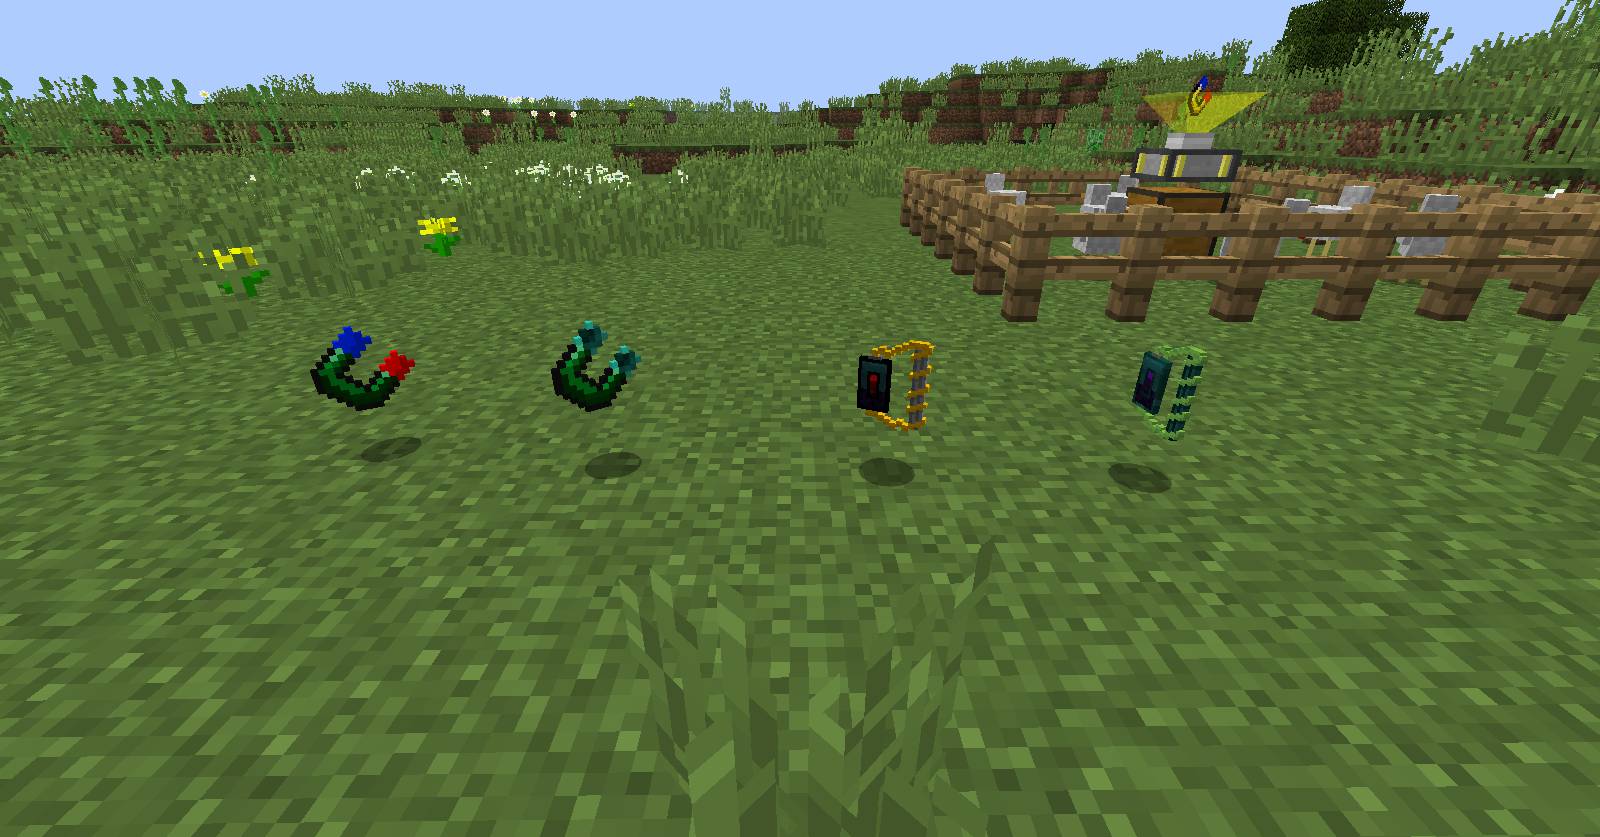 Tiered Magnets Mod 1.14.4, 1.12.2 (Make Retrieving Items Easier) 4